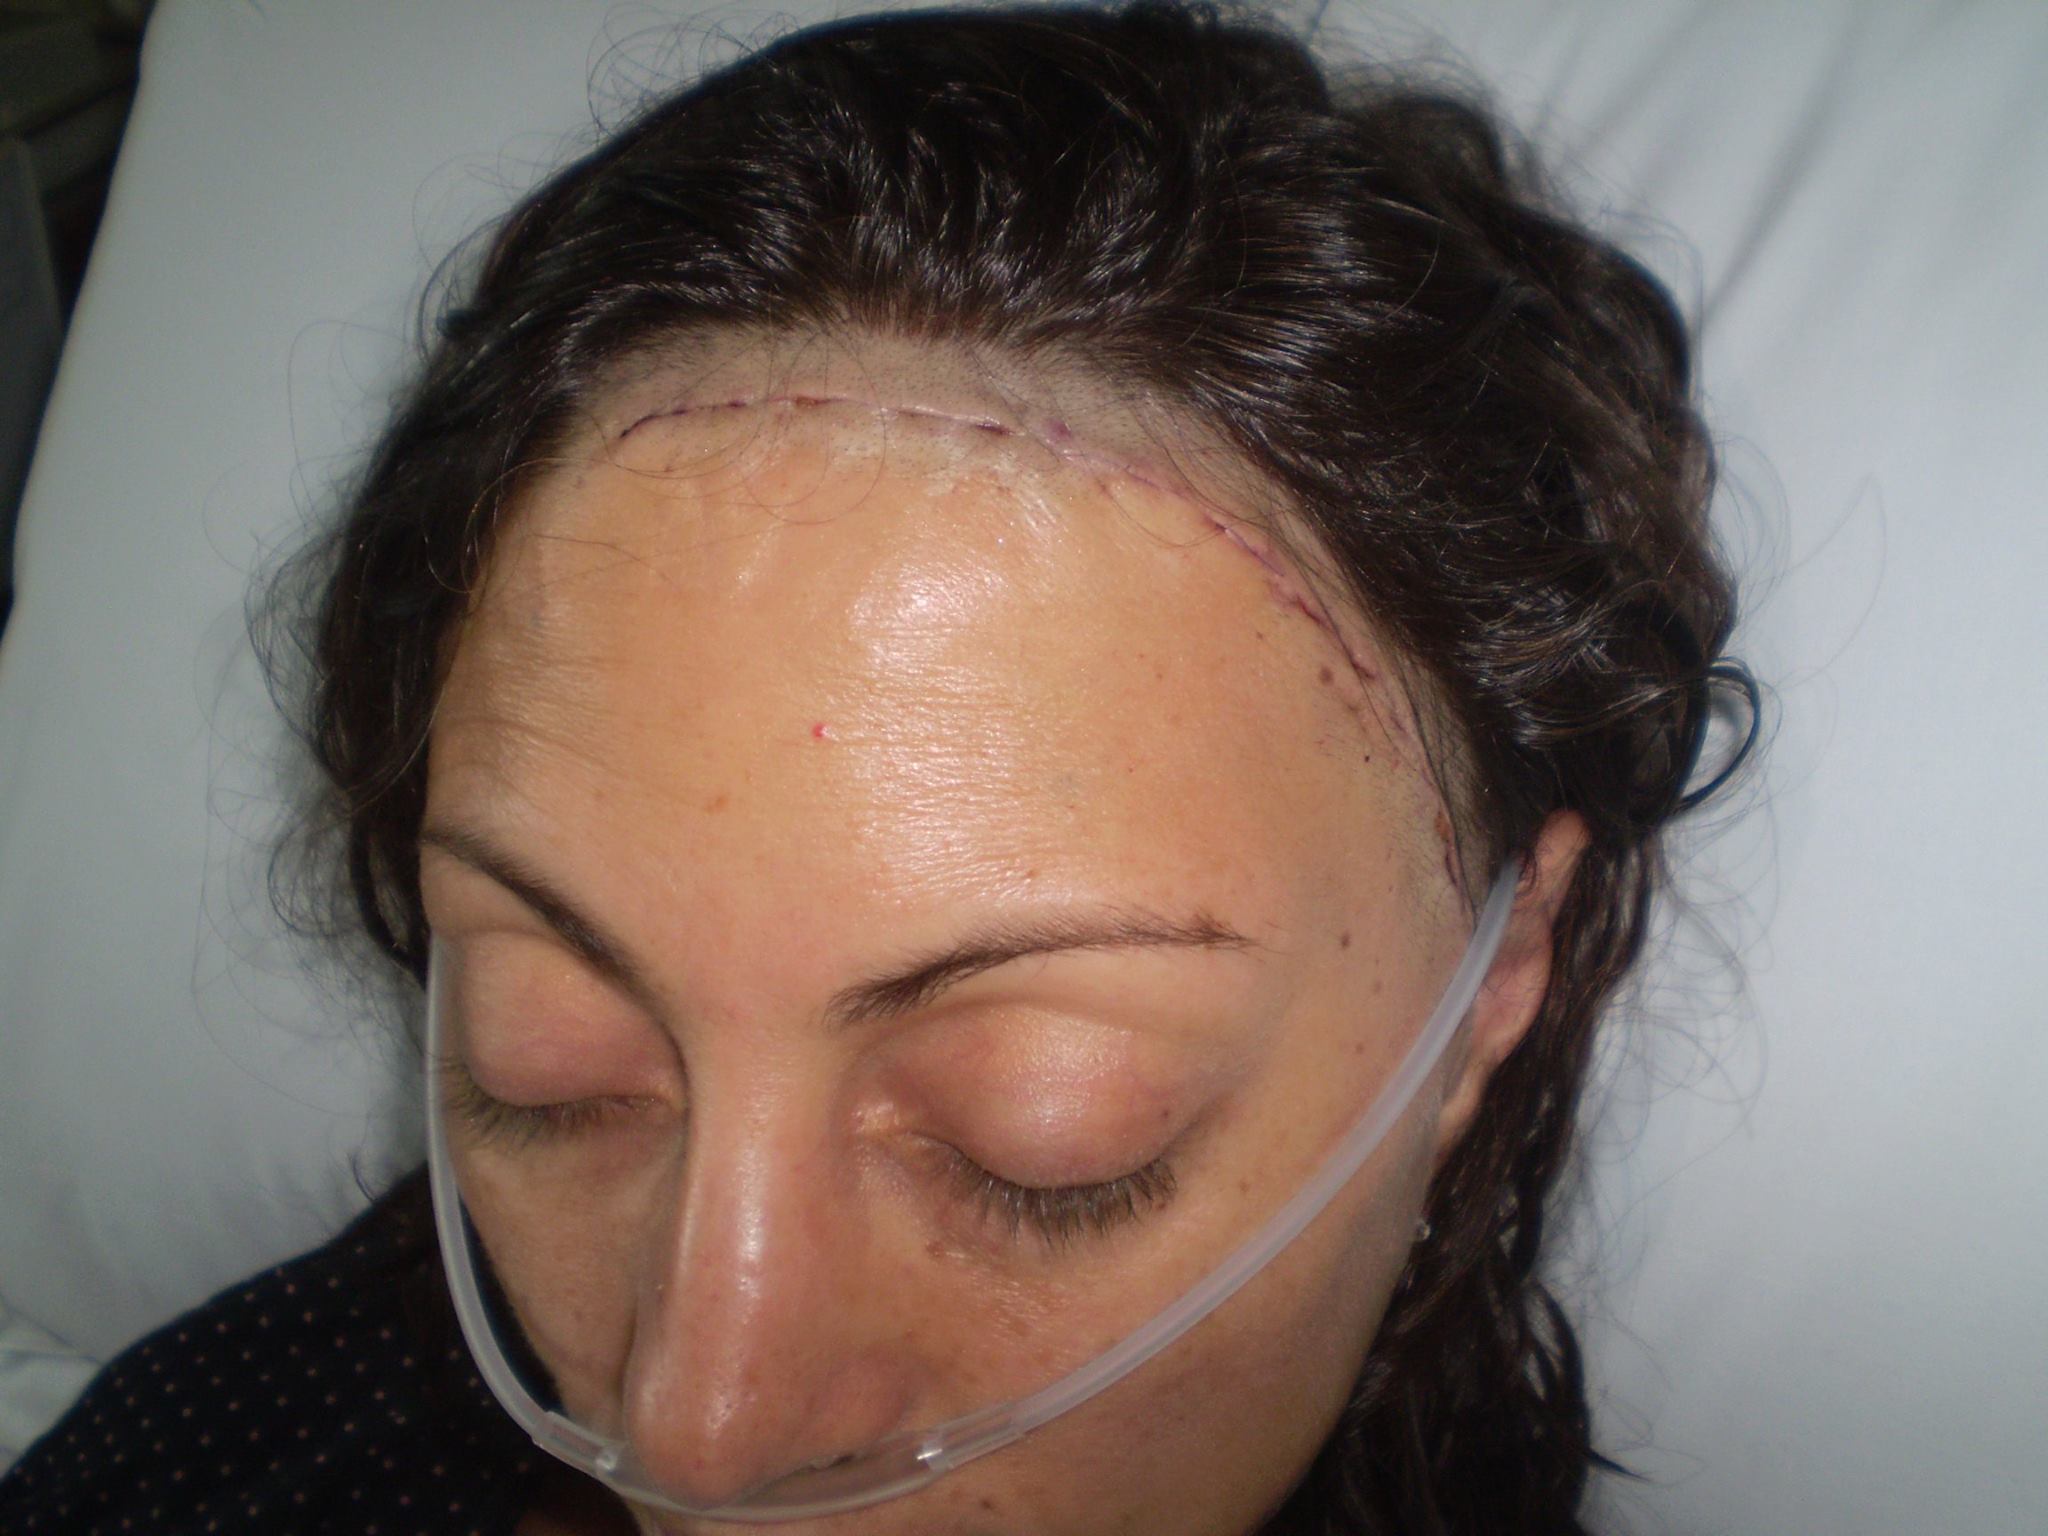 Recovering from cranial surgery, 2010.